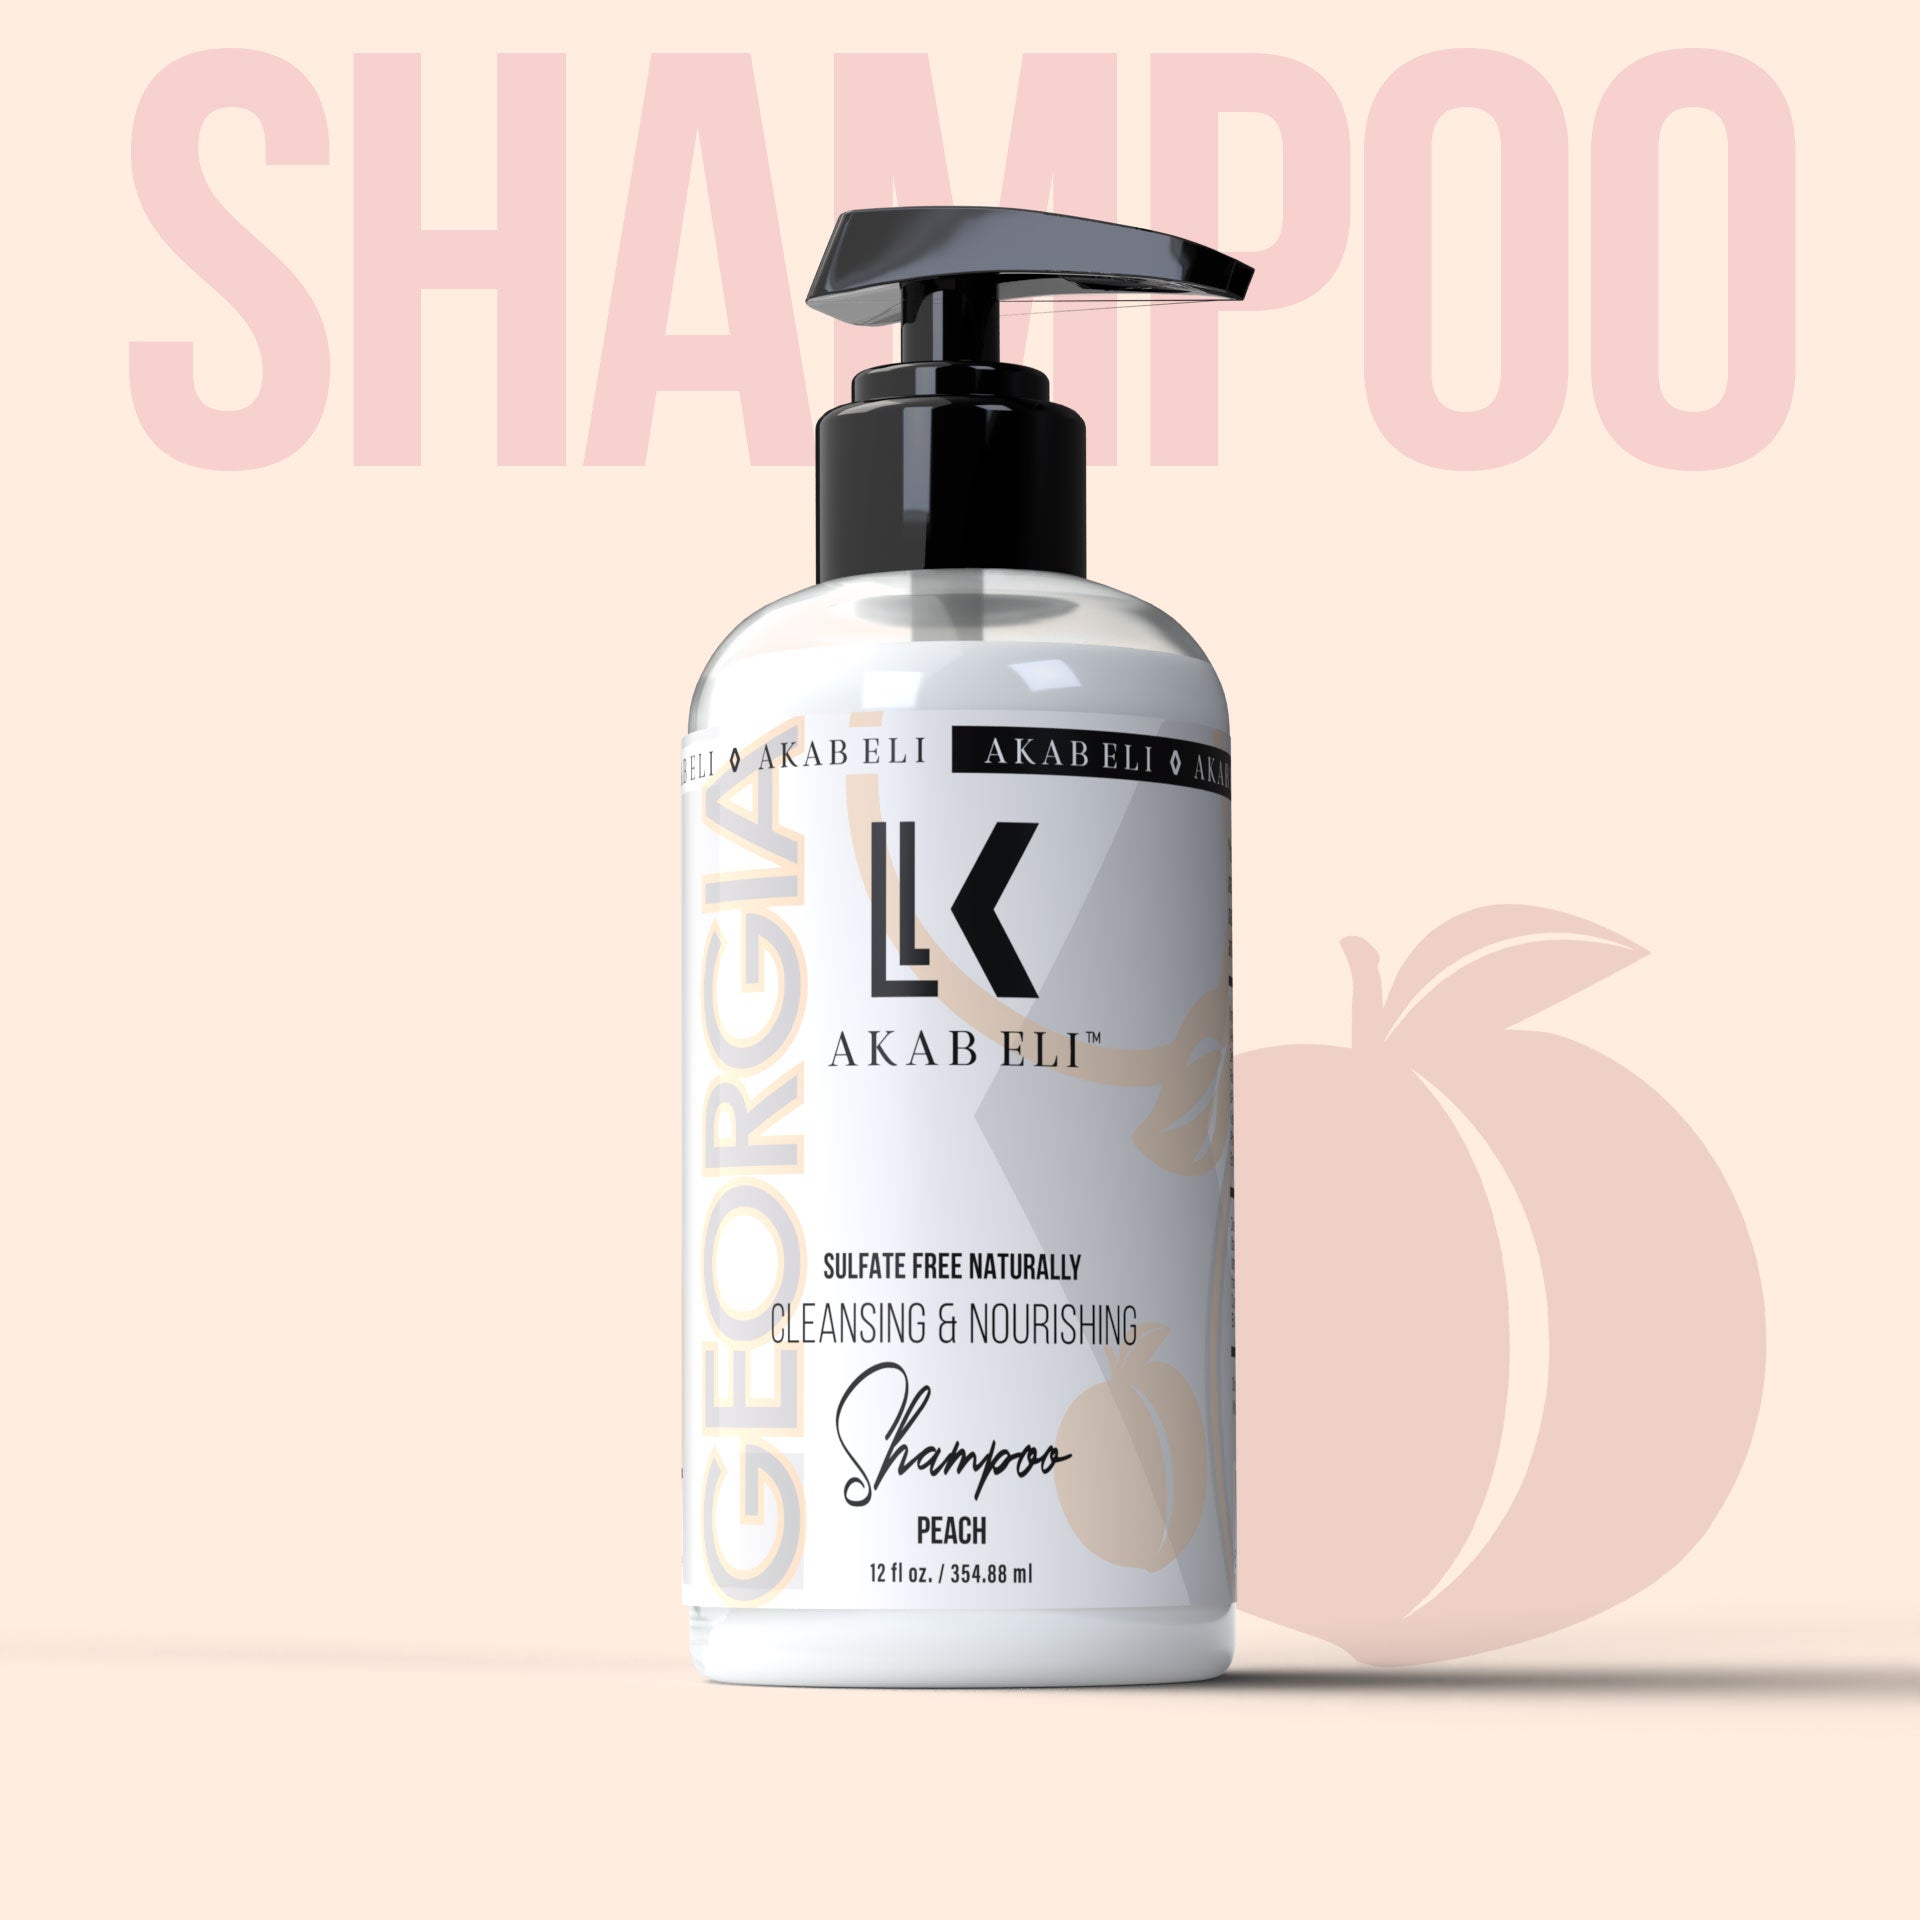 Akab Eli Georgia Hair Shampoo - A Cleansing & Nourishing Wash Full of Natural Ingredients Peach Scented